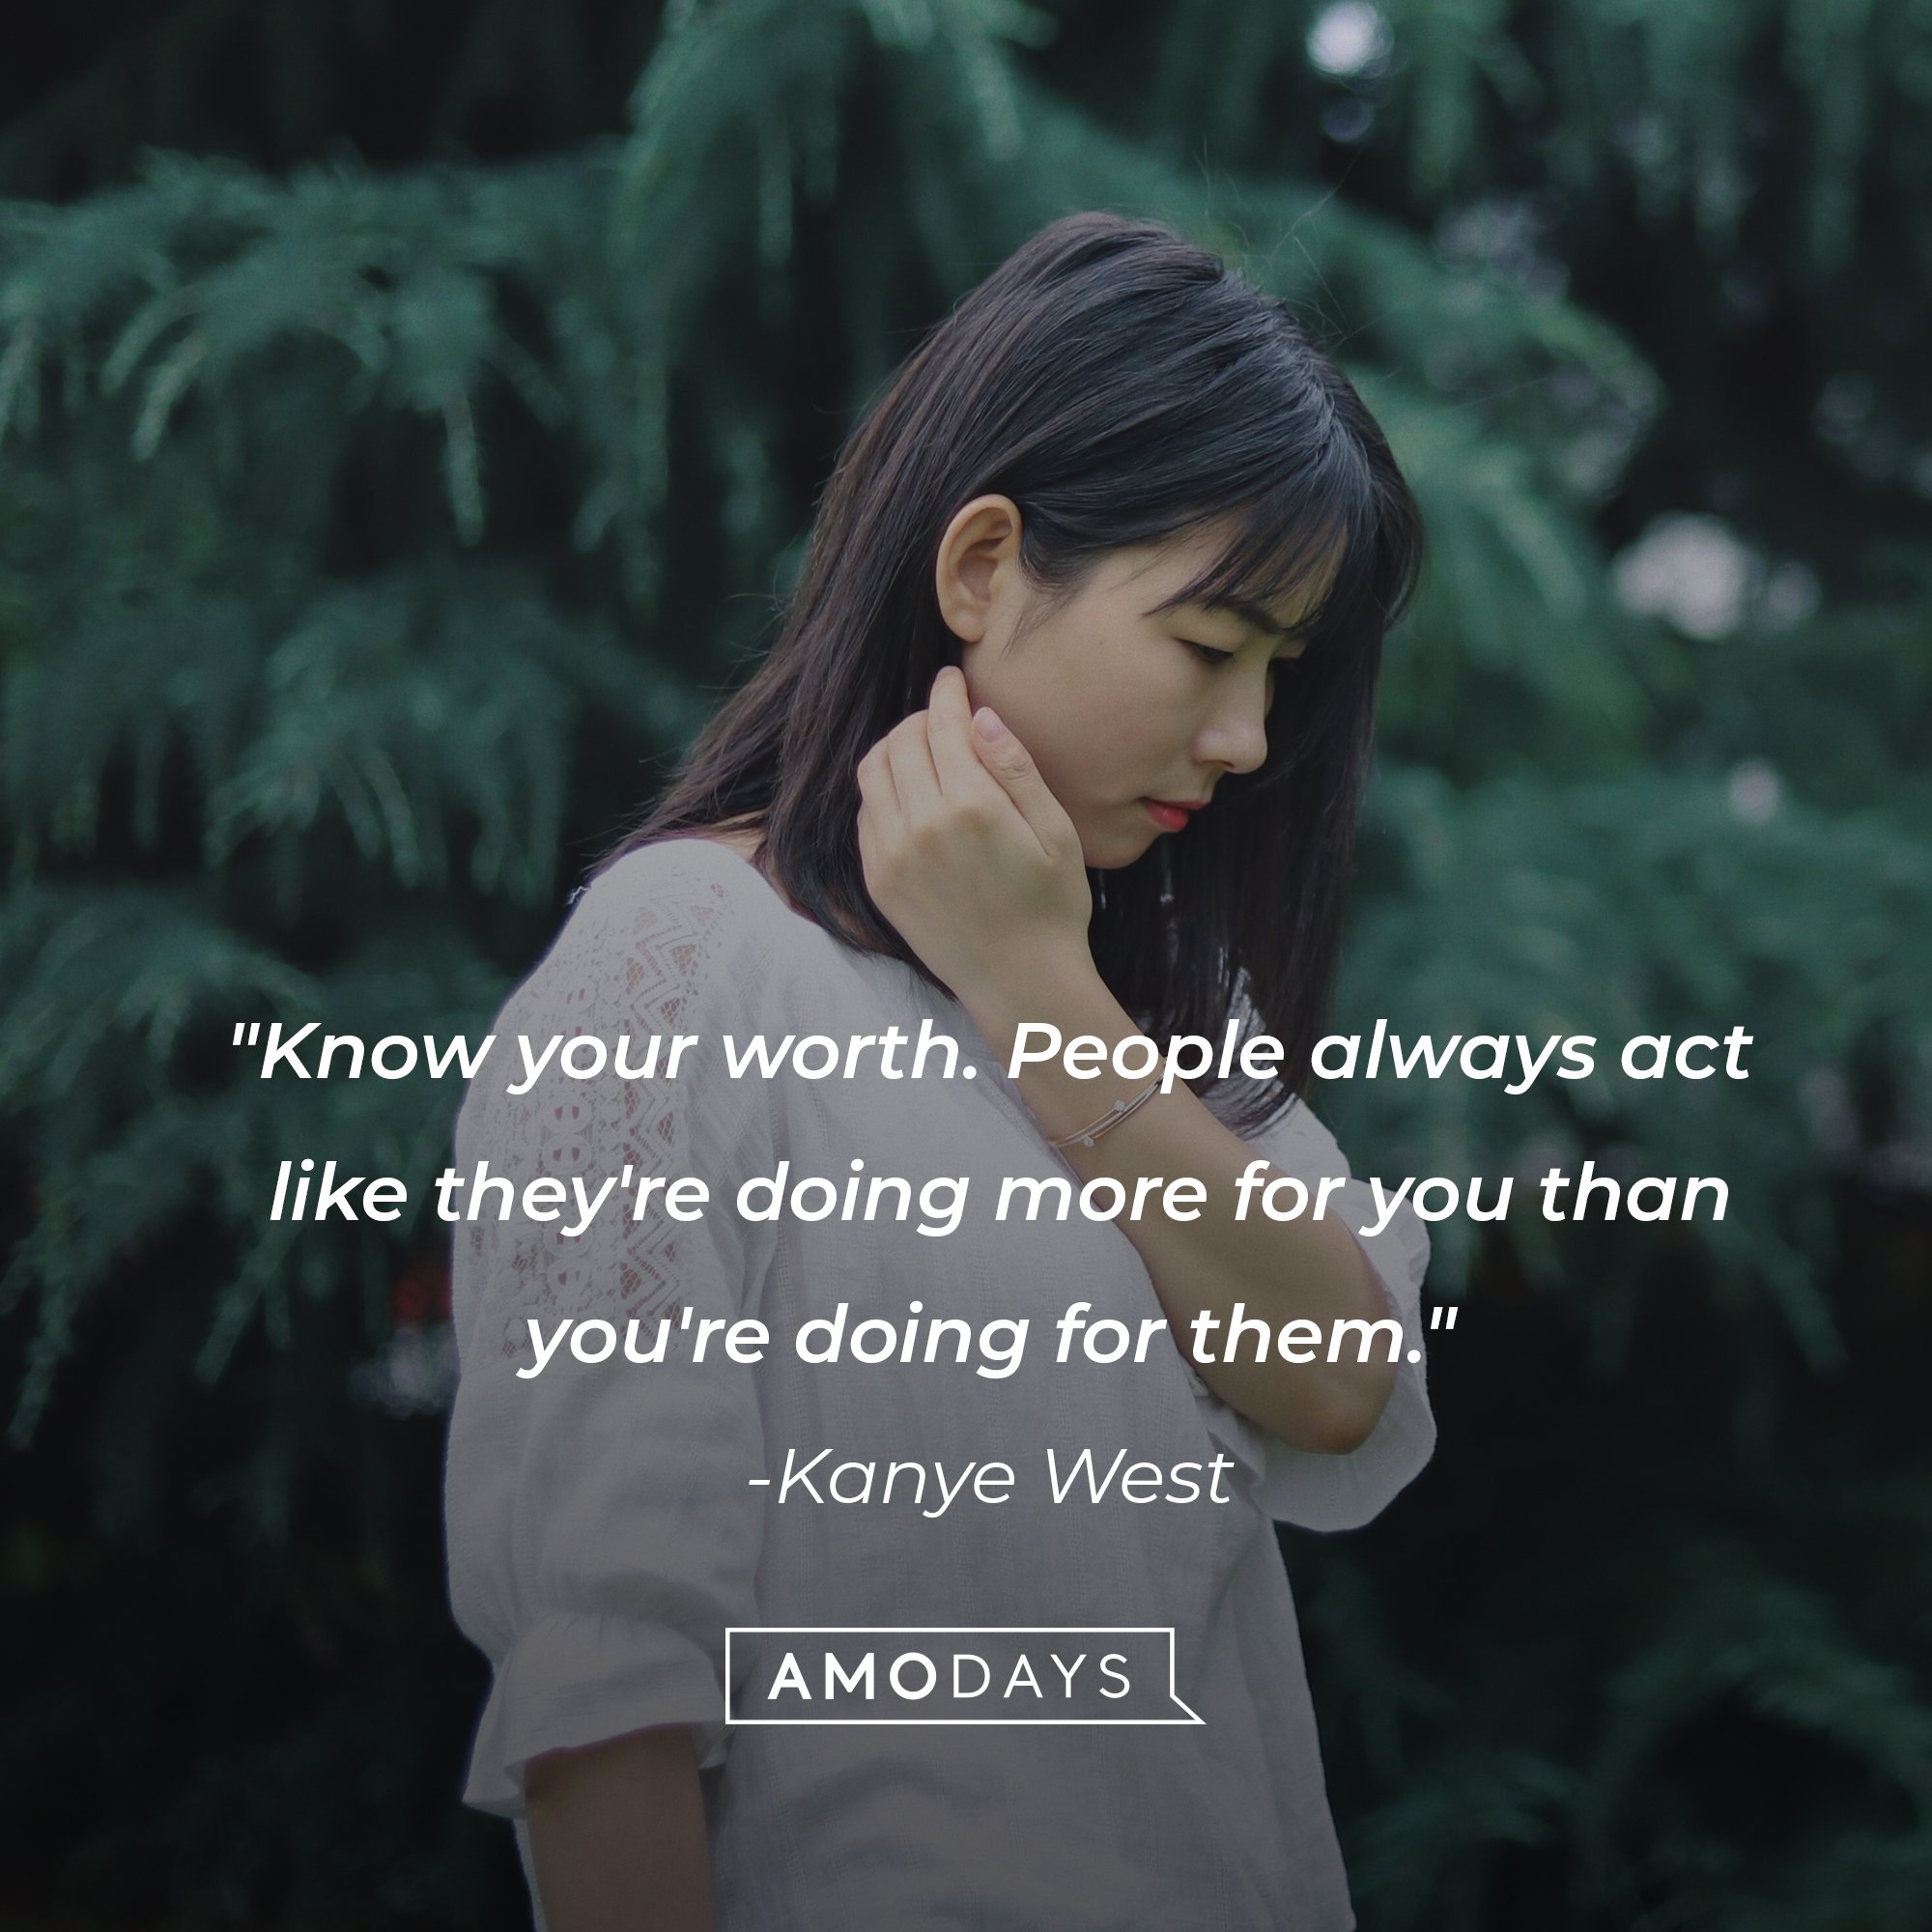 Kanye West's quote: "Know your worth. People always act like they're doing more for you than you're doing for them." | Image: AmoDays